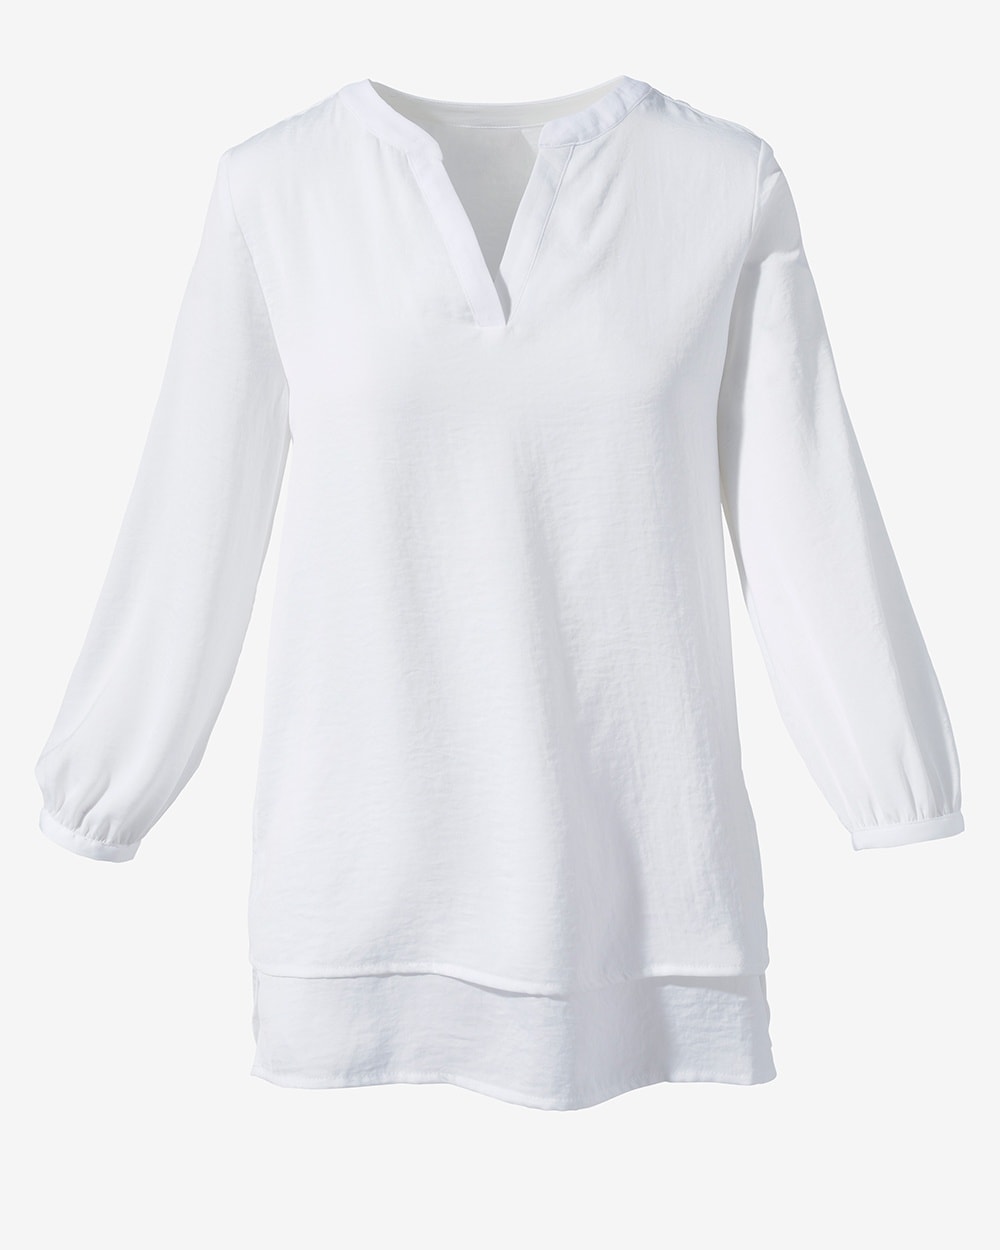 Double-Layer 3/4-Sleeve Top